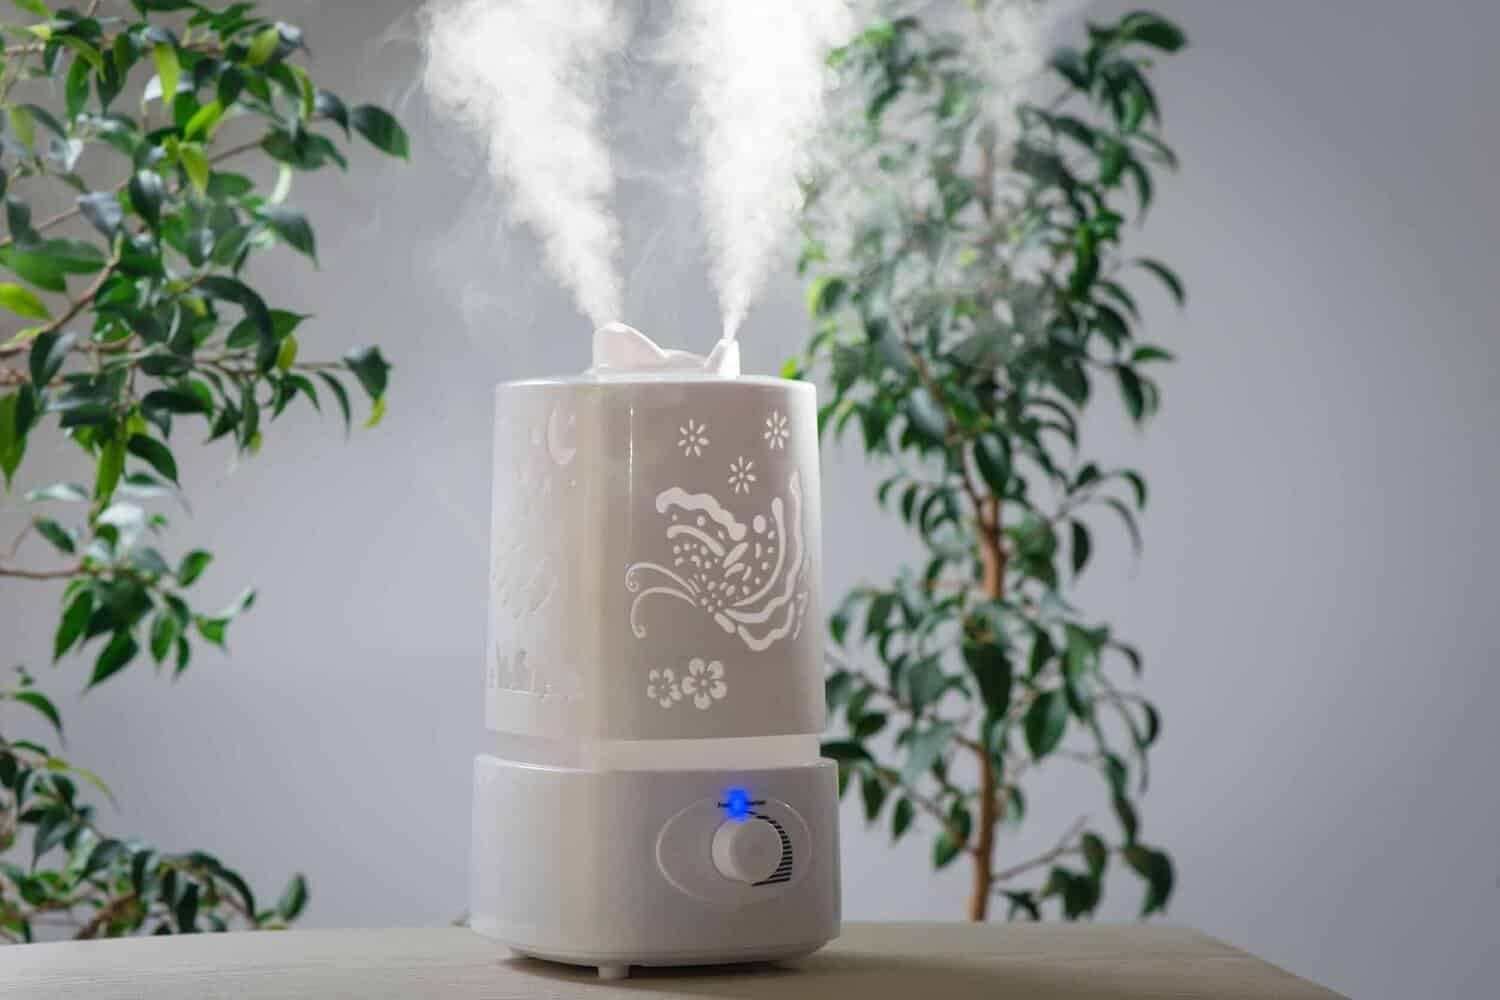 Best humidifier for Plants - Featured Image